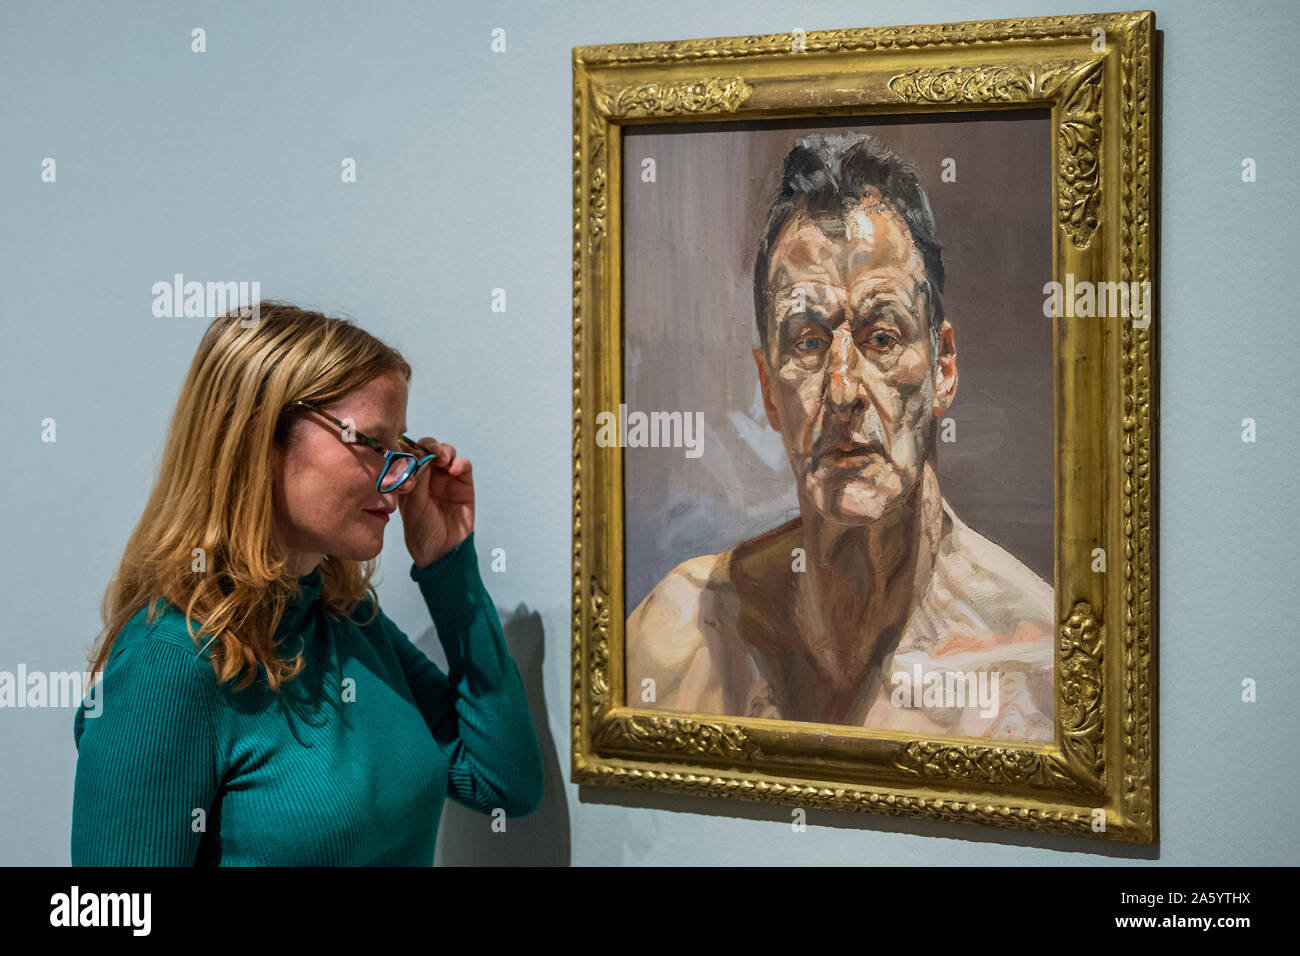 London, UK. 23rd Oct, 2019. Reflection, self portrait, 1985 - Lucian Freud self-portraits at the Royal Academy of Arts. Executed over almost seven decades on canvas and paper, the exhibition brings together 56 works that chart Freud’s artistic development. Credit: Guy Bell/Alamy Live News Stock Photo